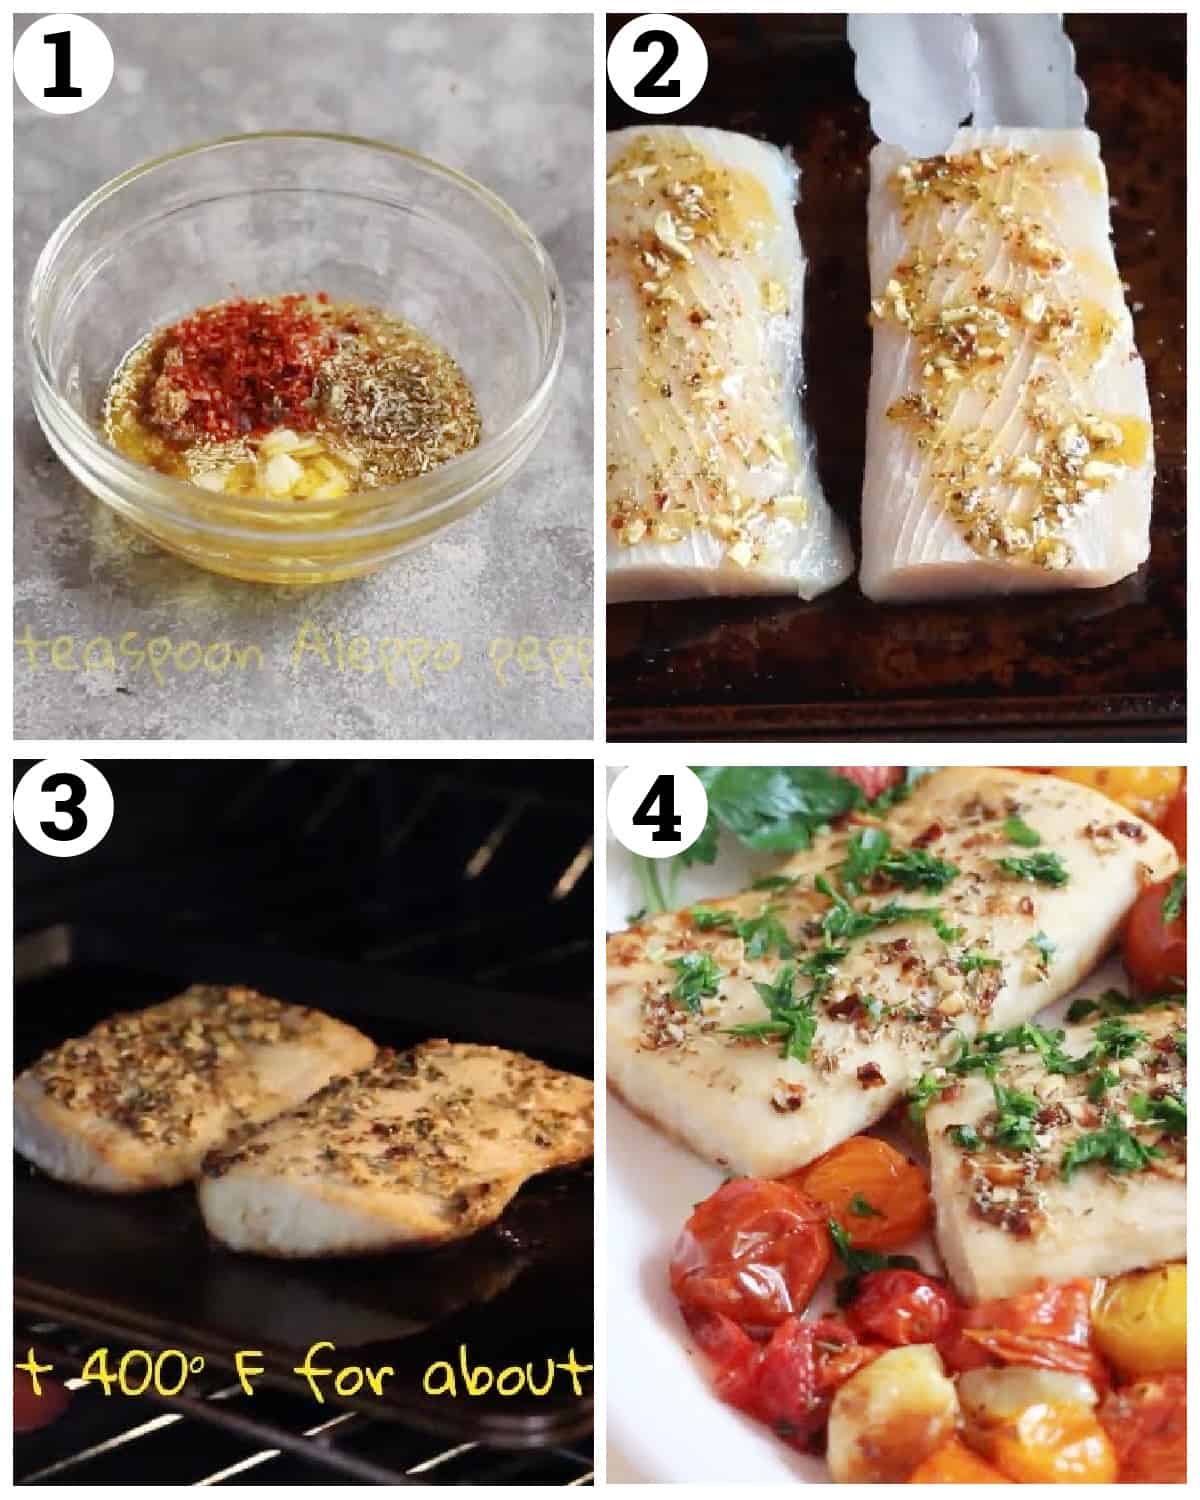 mix the spices and rub all over the mahi mahi then bake and serve. 